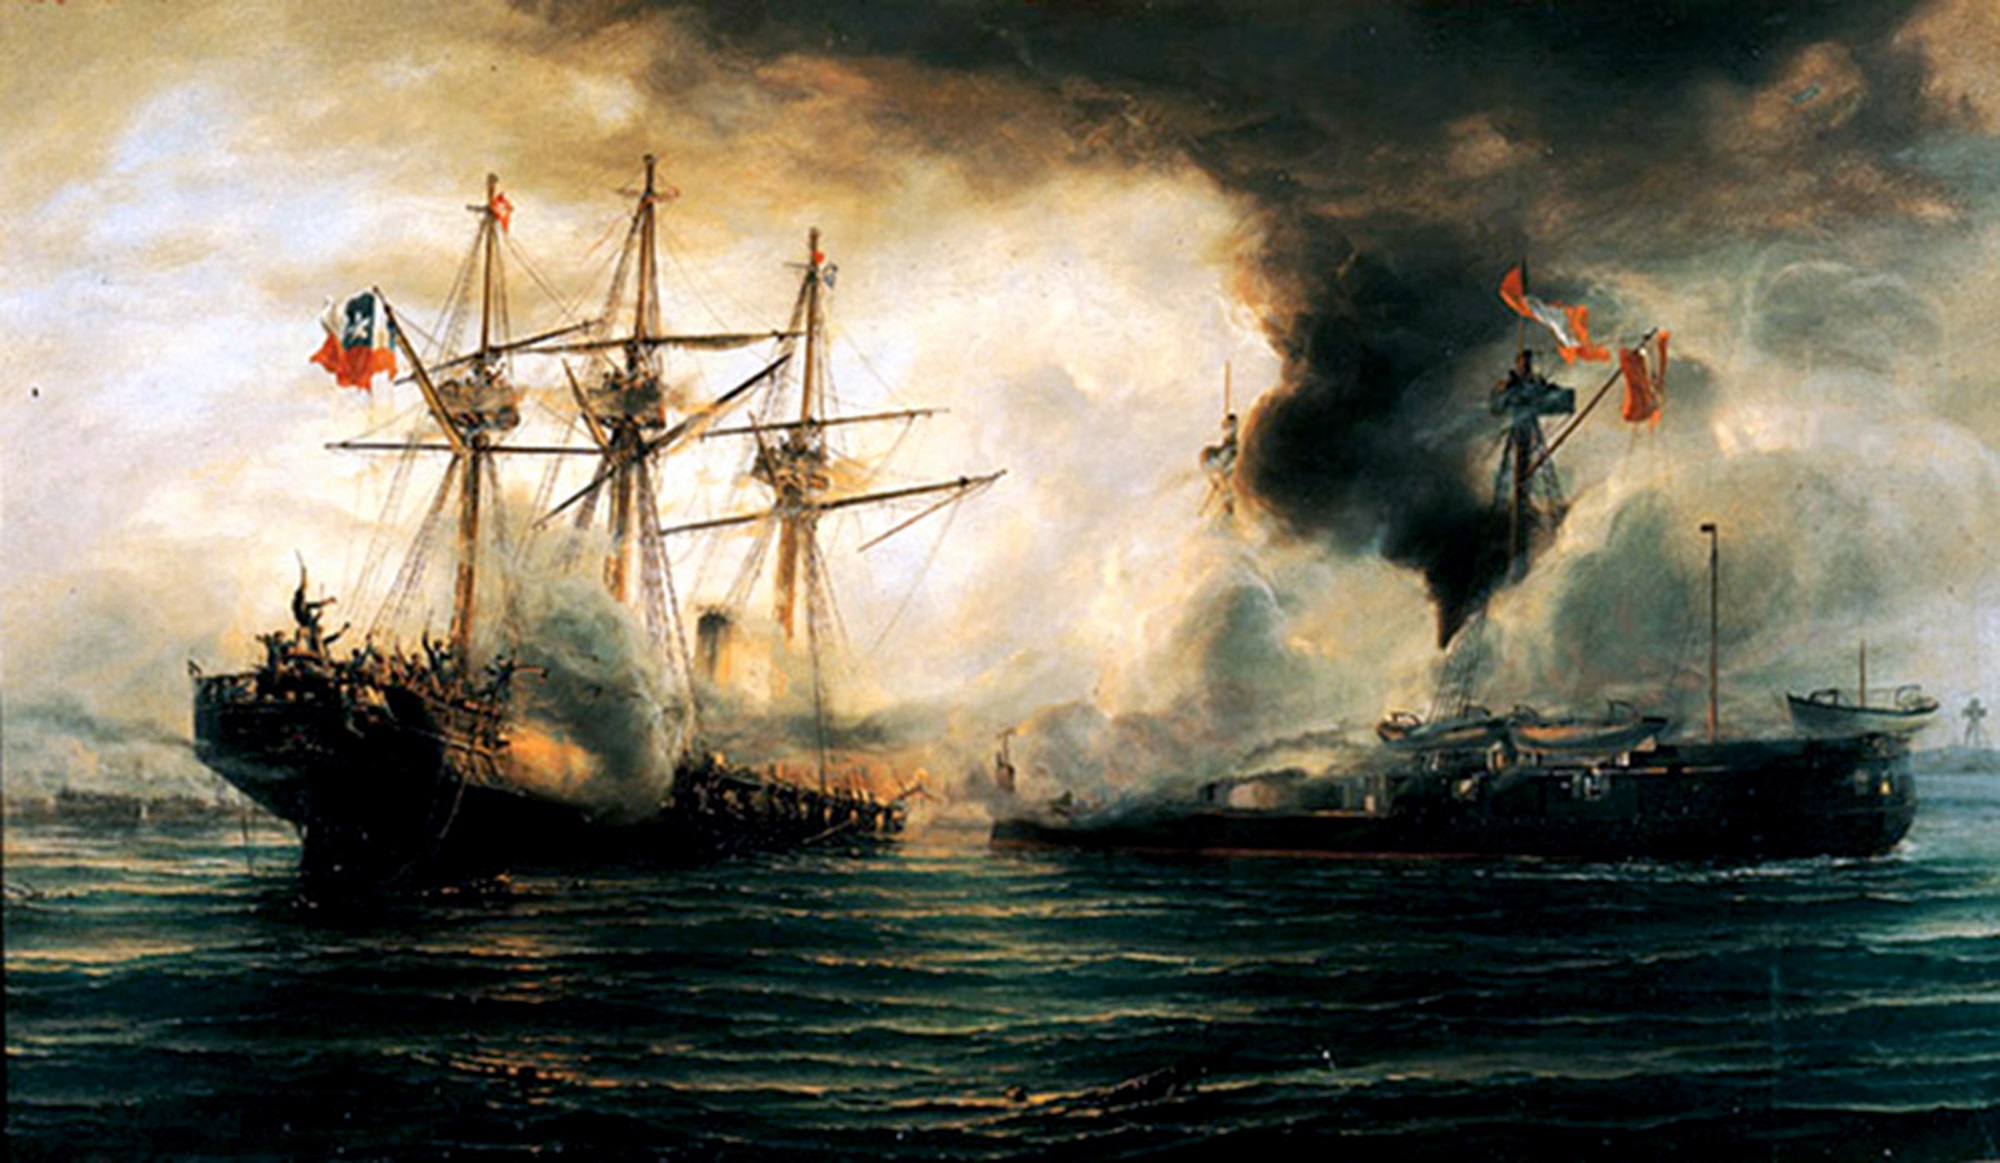 Sinking_of_the_Esmeralda_during_the_battle_of_Iquique